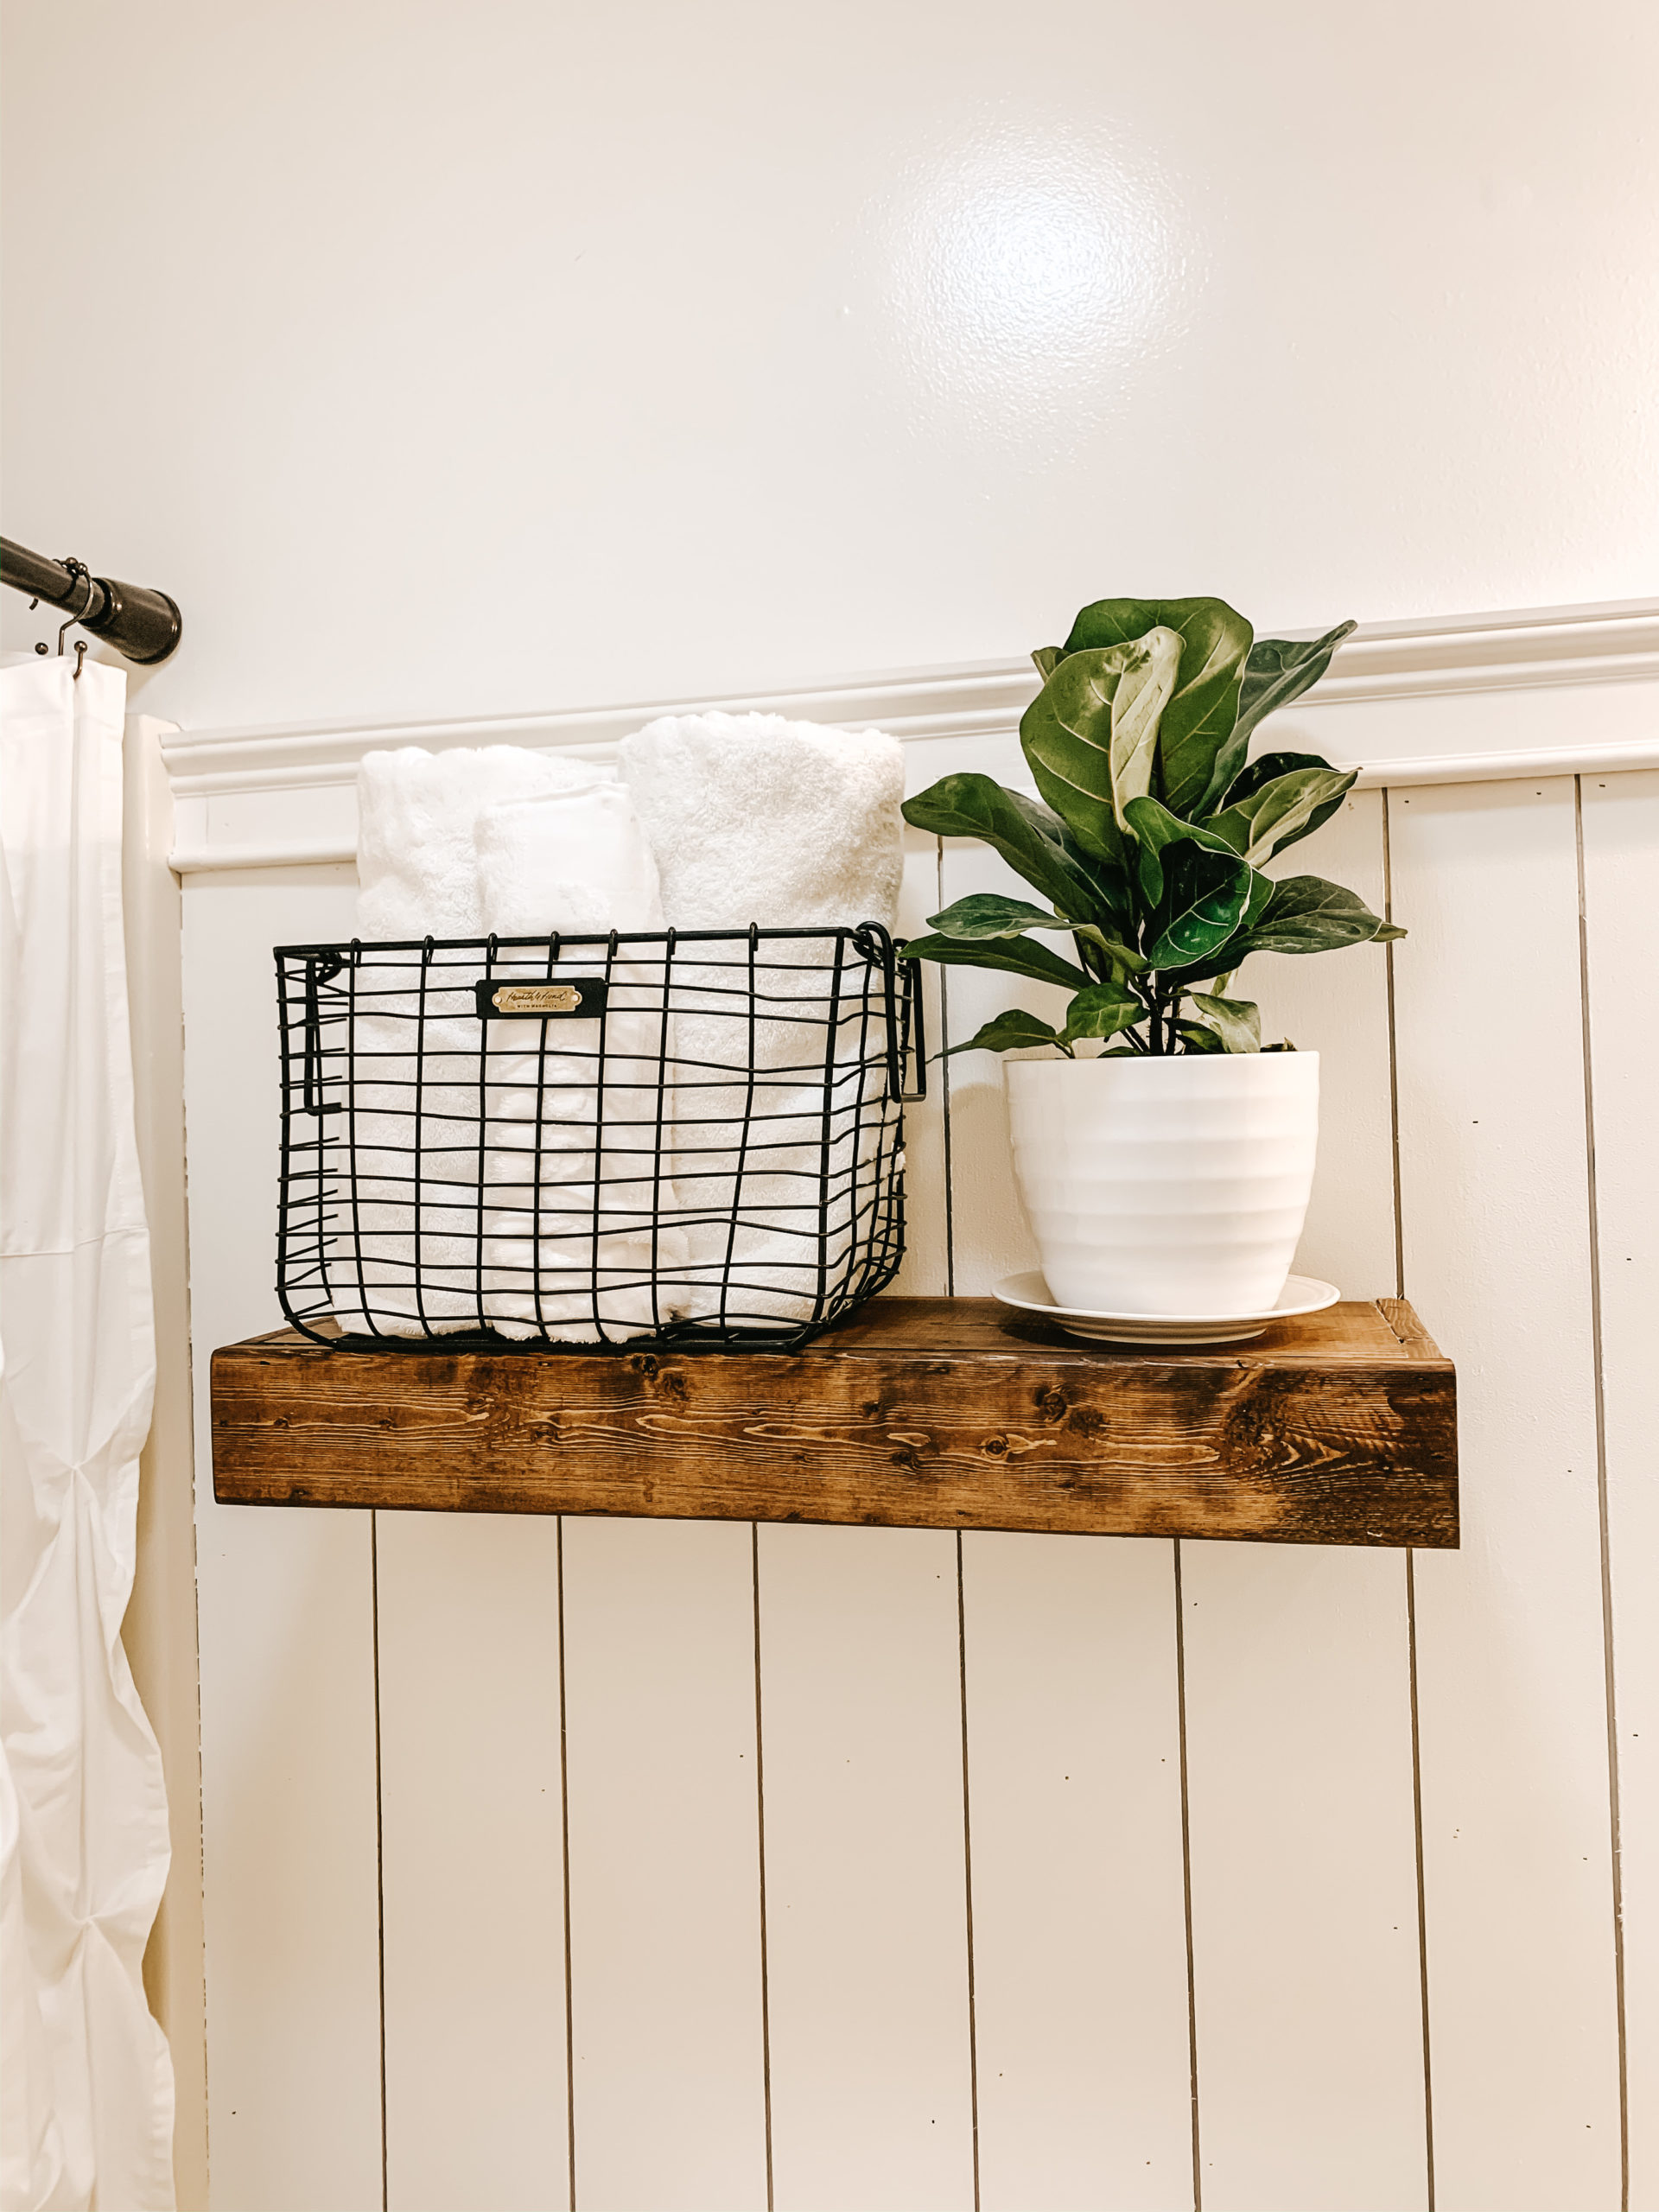 DIY Floating Shelf work great for small spaces - over bathroom toilets filled with towels and plants